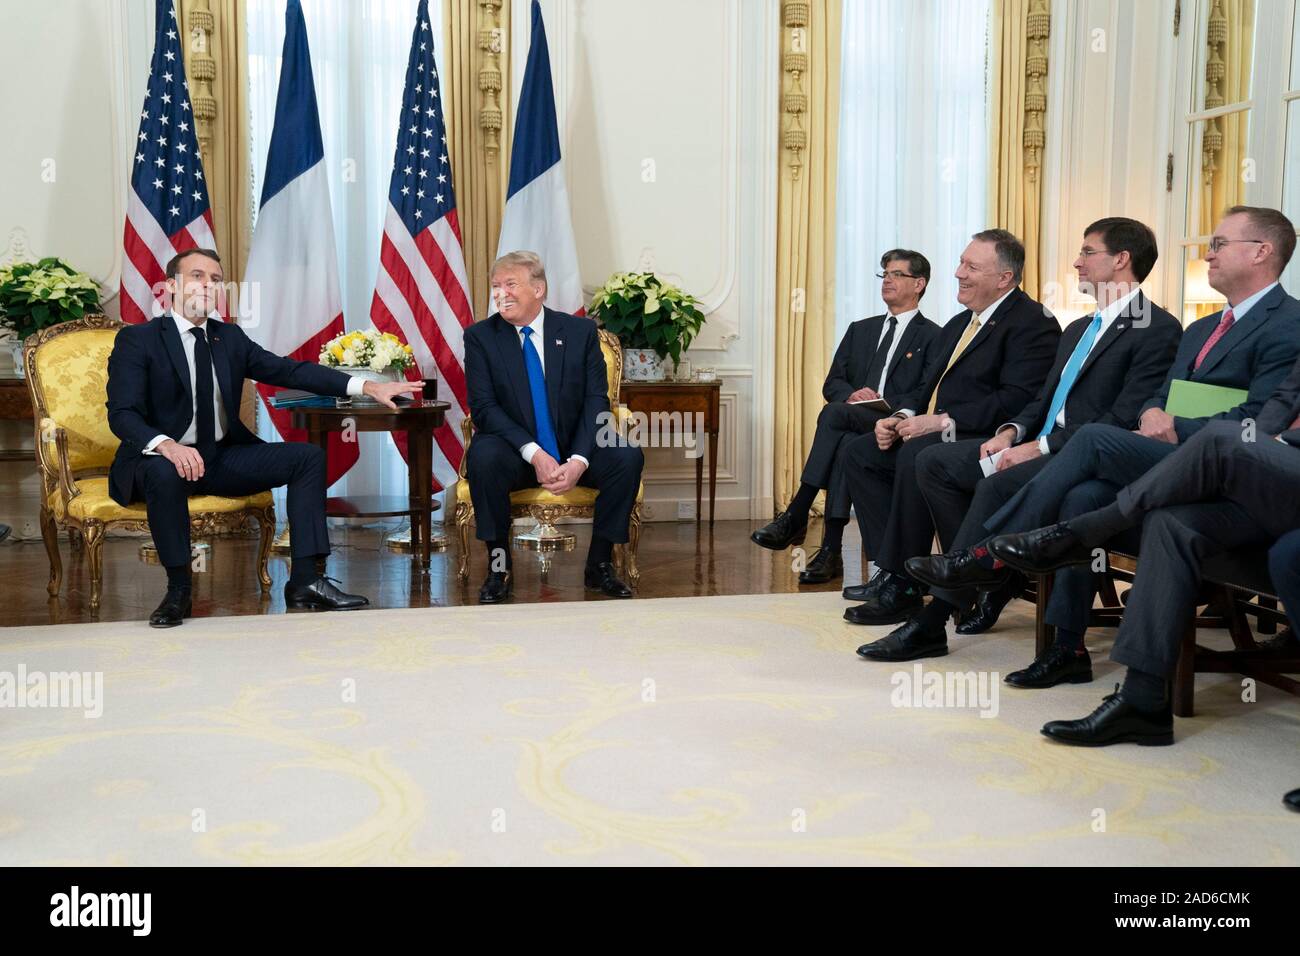 London, UK. 03 December, 2019. U.S. President Donald Trump and French President Emmanuel Macron pose for photographers prior to the start of their bilateral meeting before the NATO Summit at Winfield House December 3, 2019 in London, UK.  Credit: Shealah Craighead/Planetpix/Alamy Live News Stock Photo